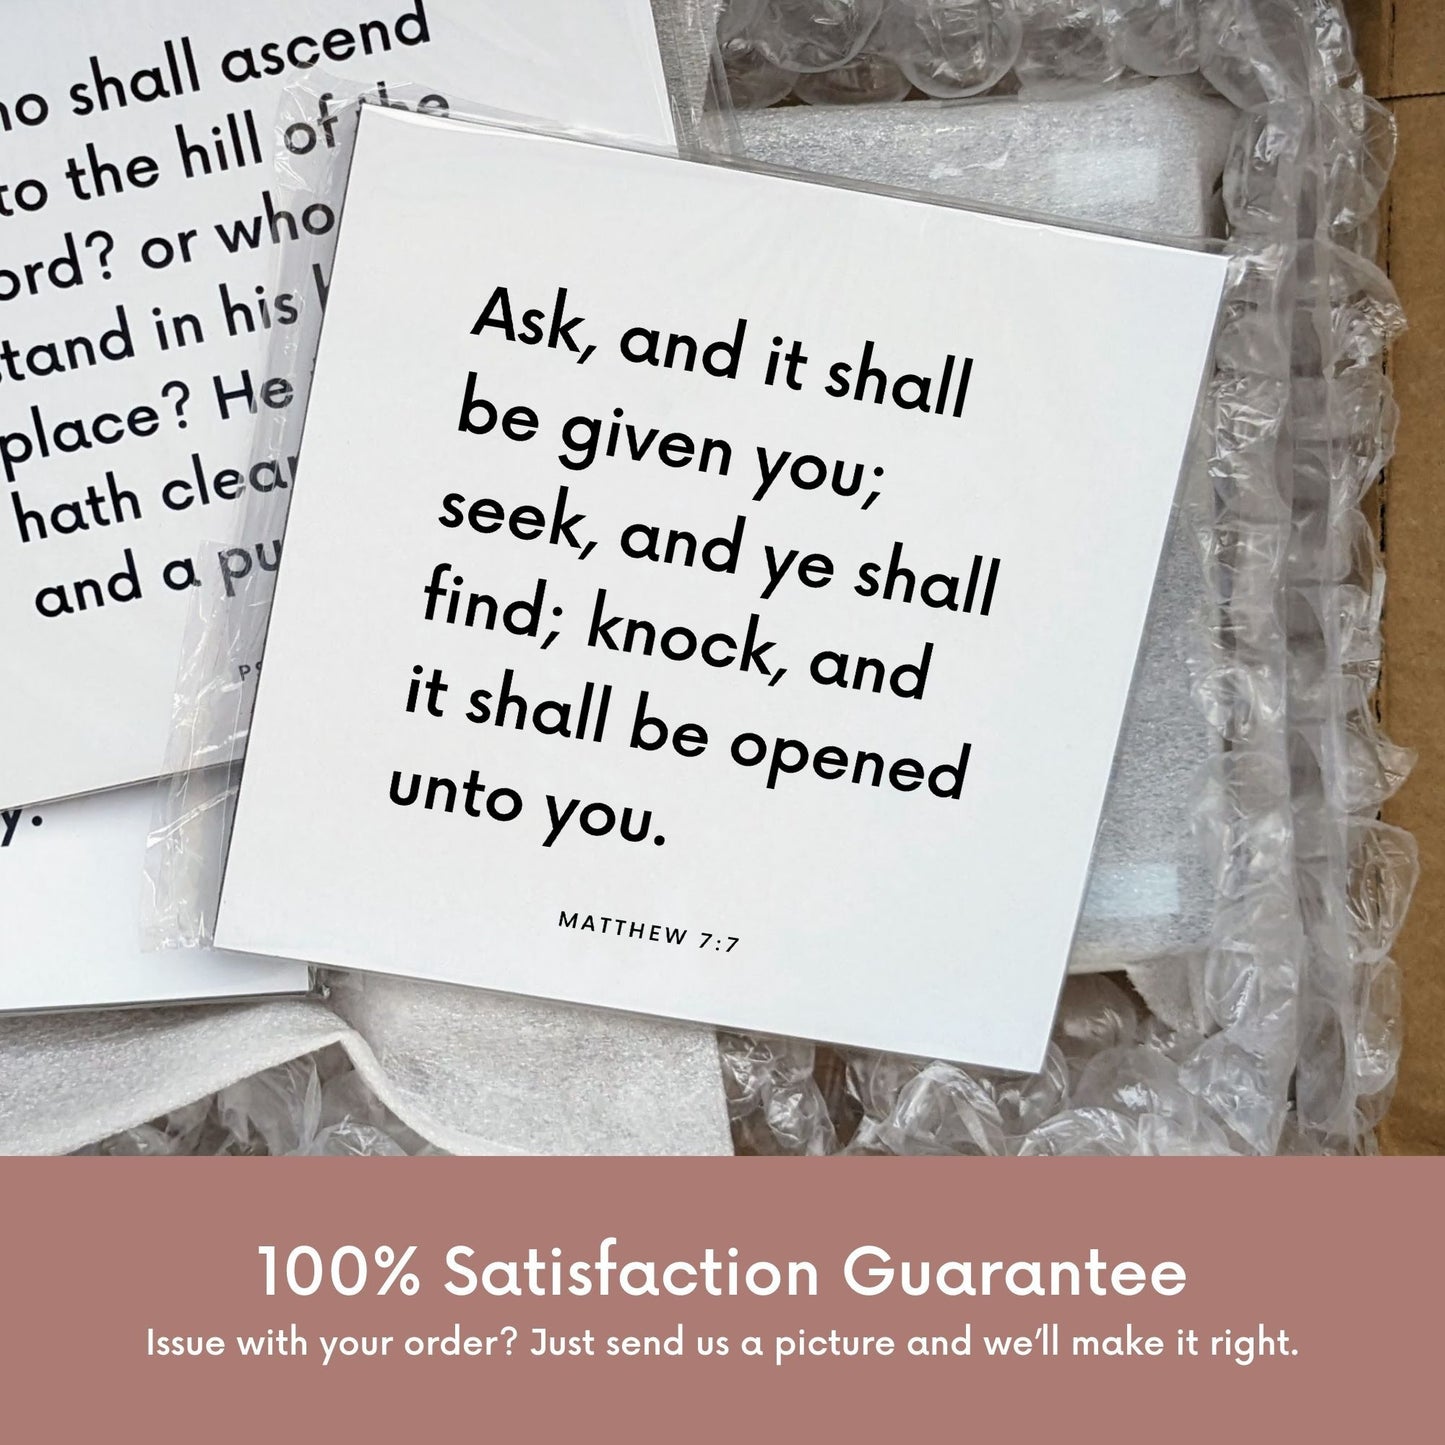 Shipping materials for scripture tile of Matthew 7:7 - "Ask, and it shall be given you; seek, and ye shall find"